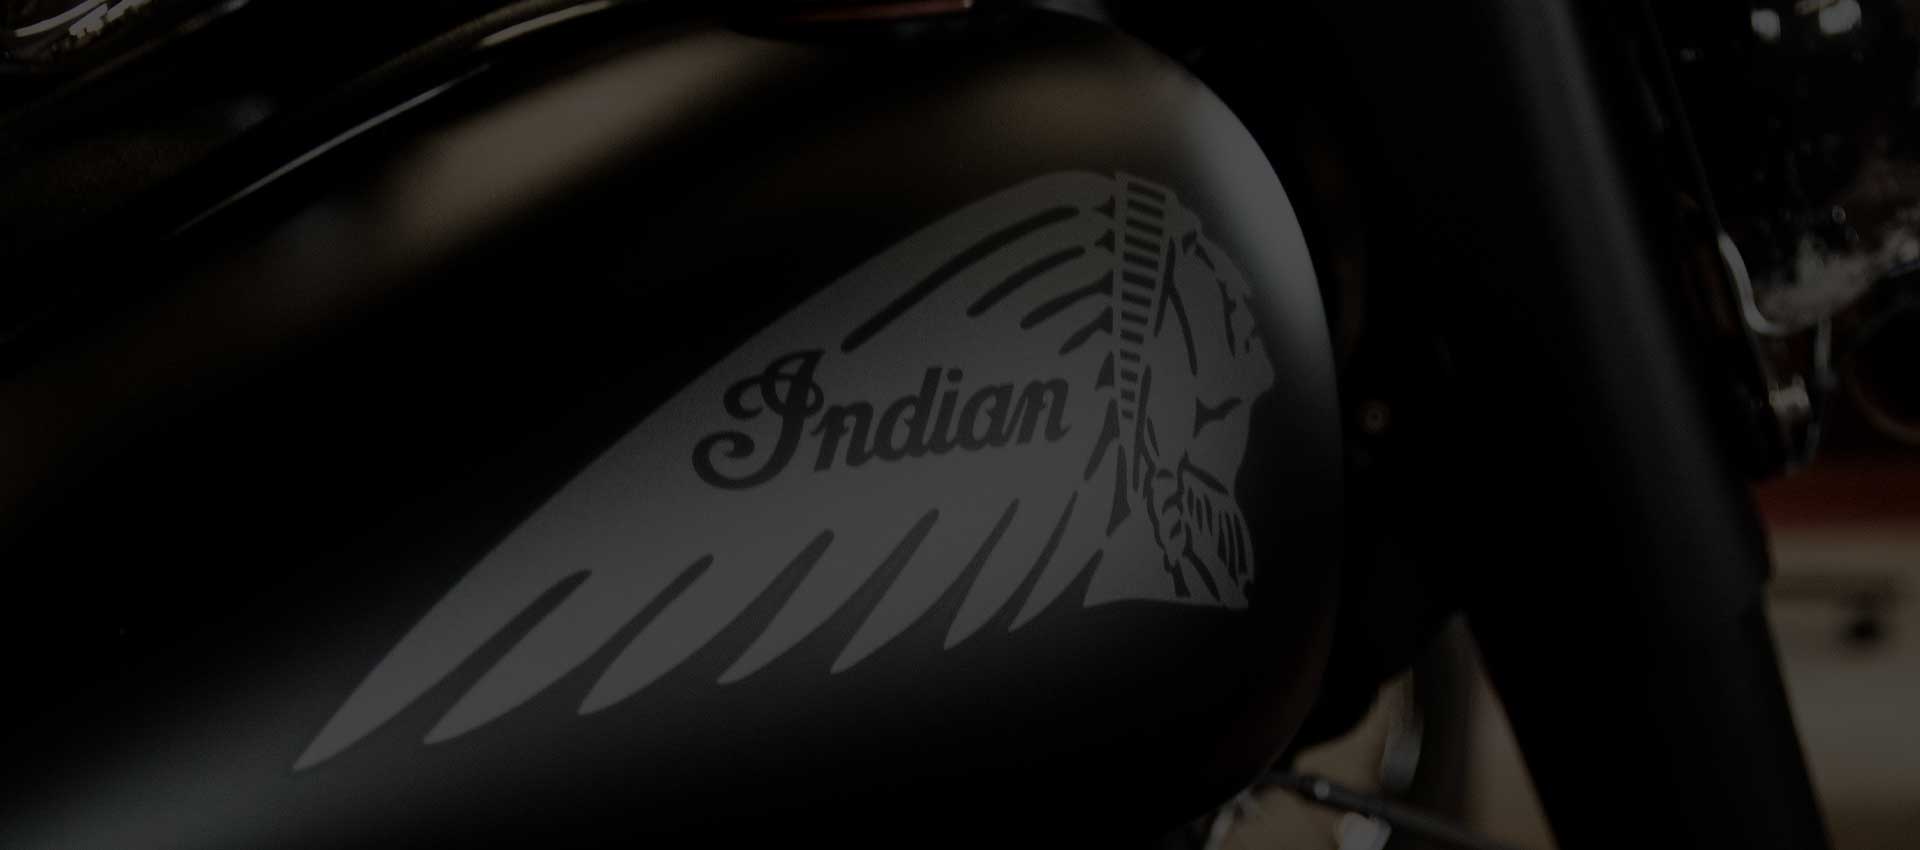 Evil Empire Designs New Site Coming Soon Indian Motorcycle Aftermarket Bags, fender, Parts